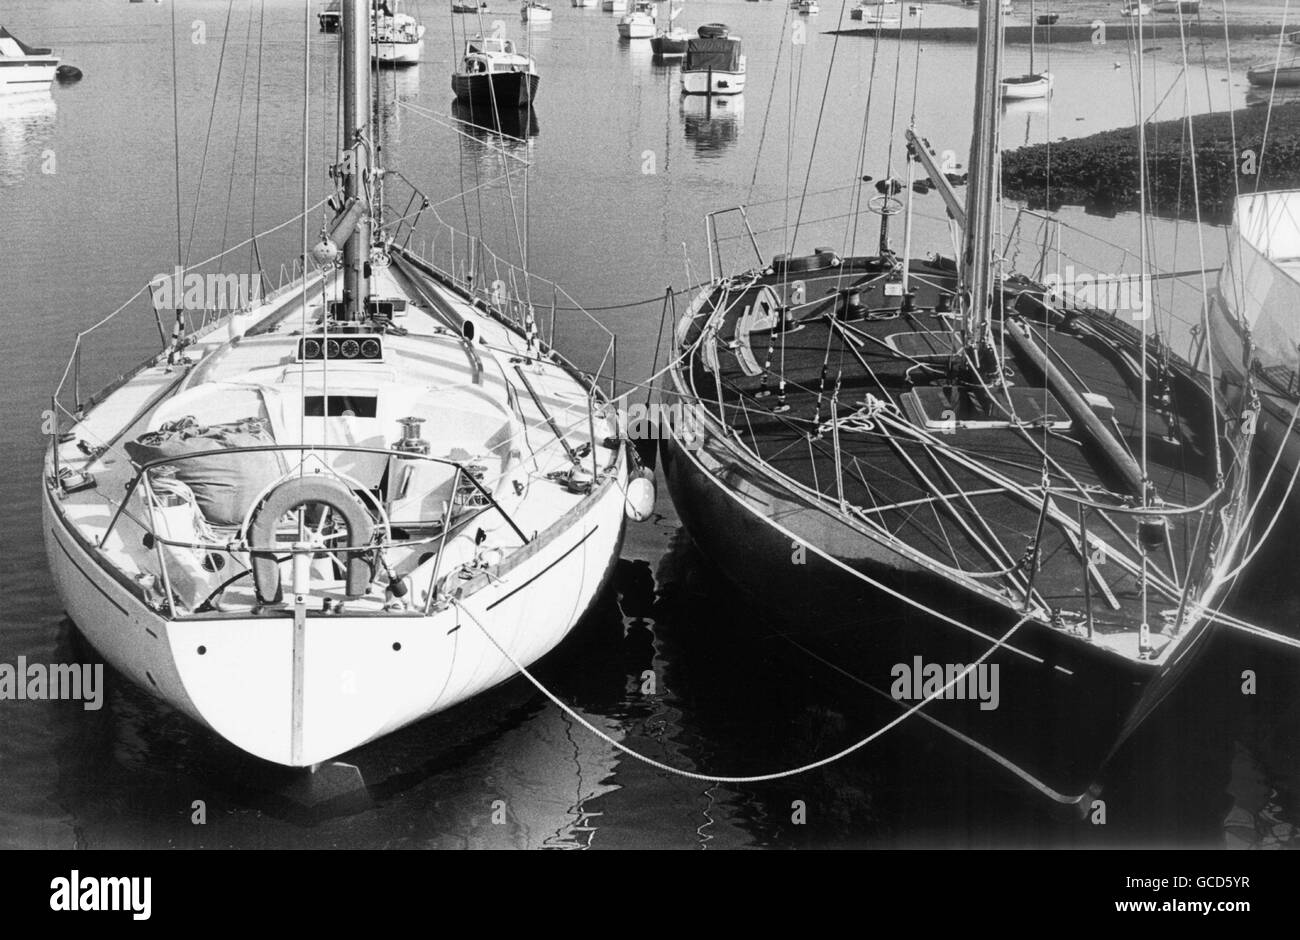 AJAX NEWS PHOTOS. 1973. HAMBLE, ENGLAND.  - ADMIRAL'S CUP CONTENDERS - (L-R) BRITISH ADMIRAL'S CUP HOPEFUL NORTHWIND AND FRENCH YACHT REVOLUTION. PHOTO:JONATHAN EASTLAND/AJAX  REF:REVOLUTION 1973 Stock Photo